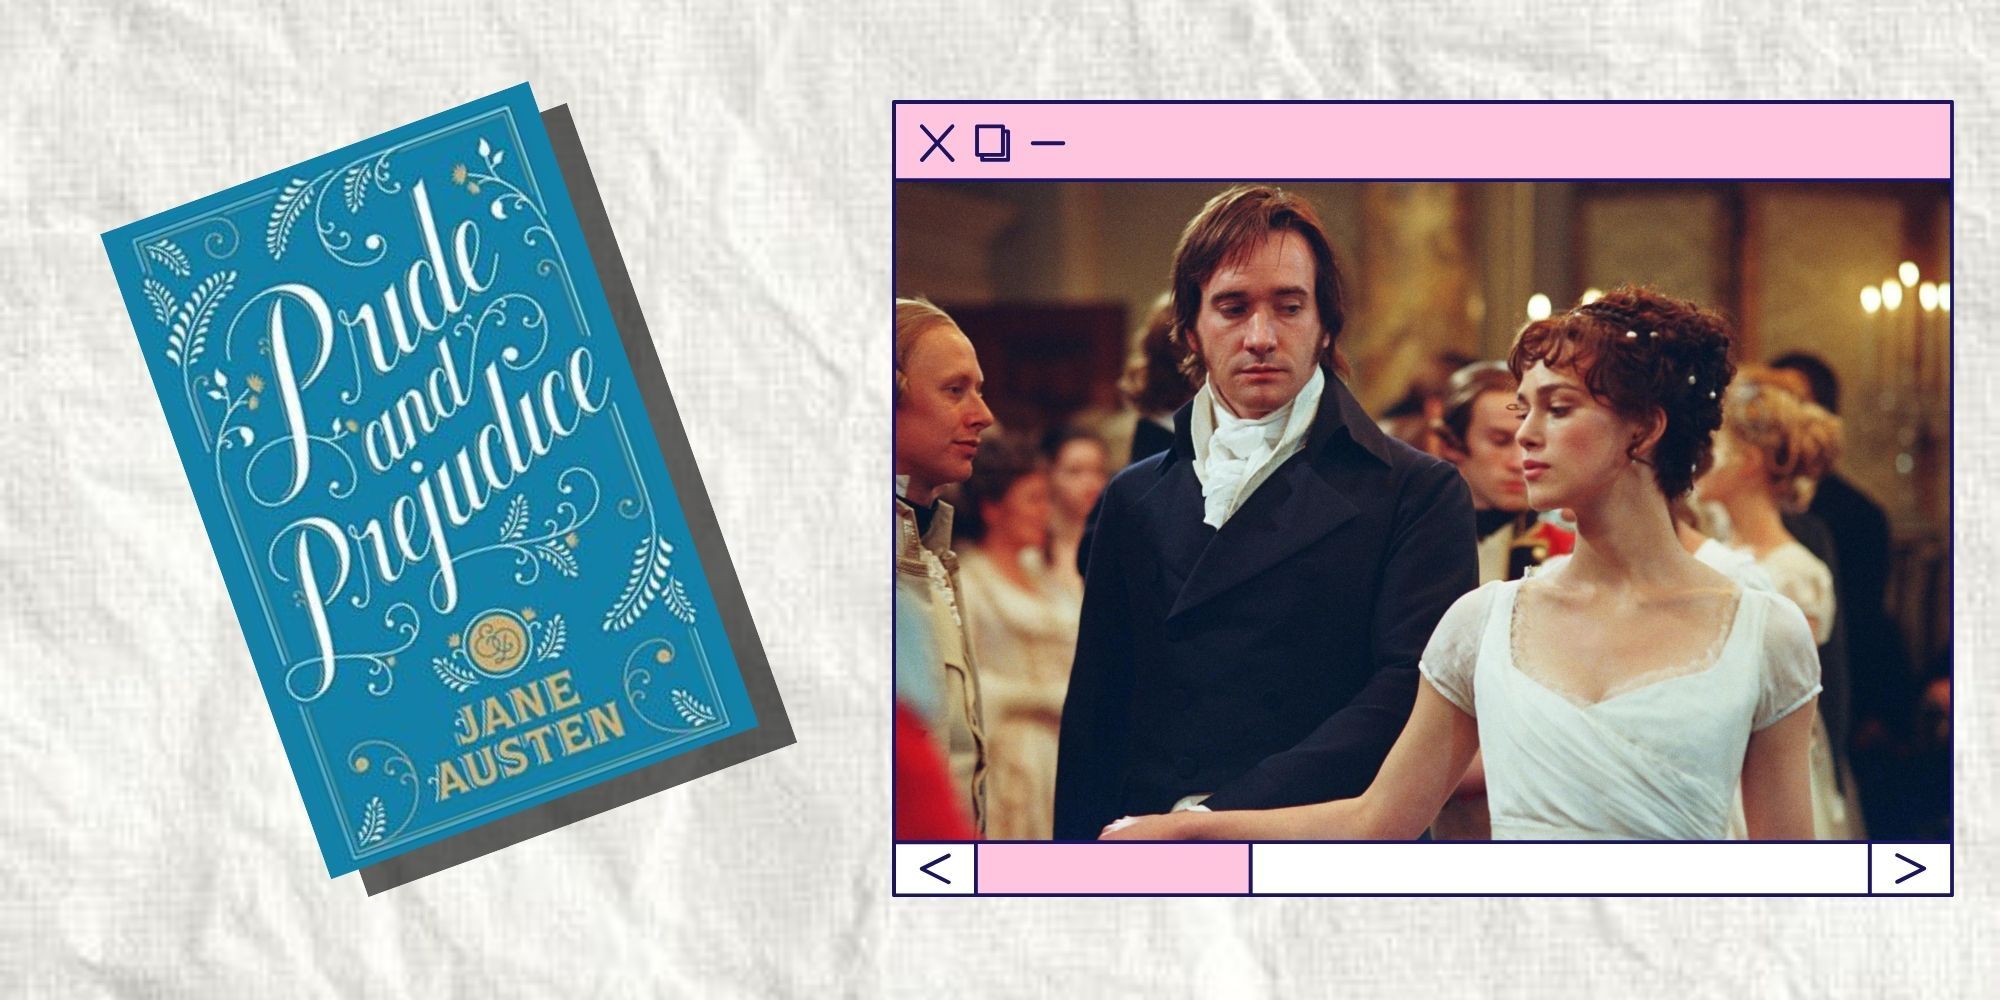 Pride and Prejudice book placed next to a phone with the Netflix app